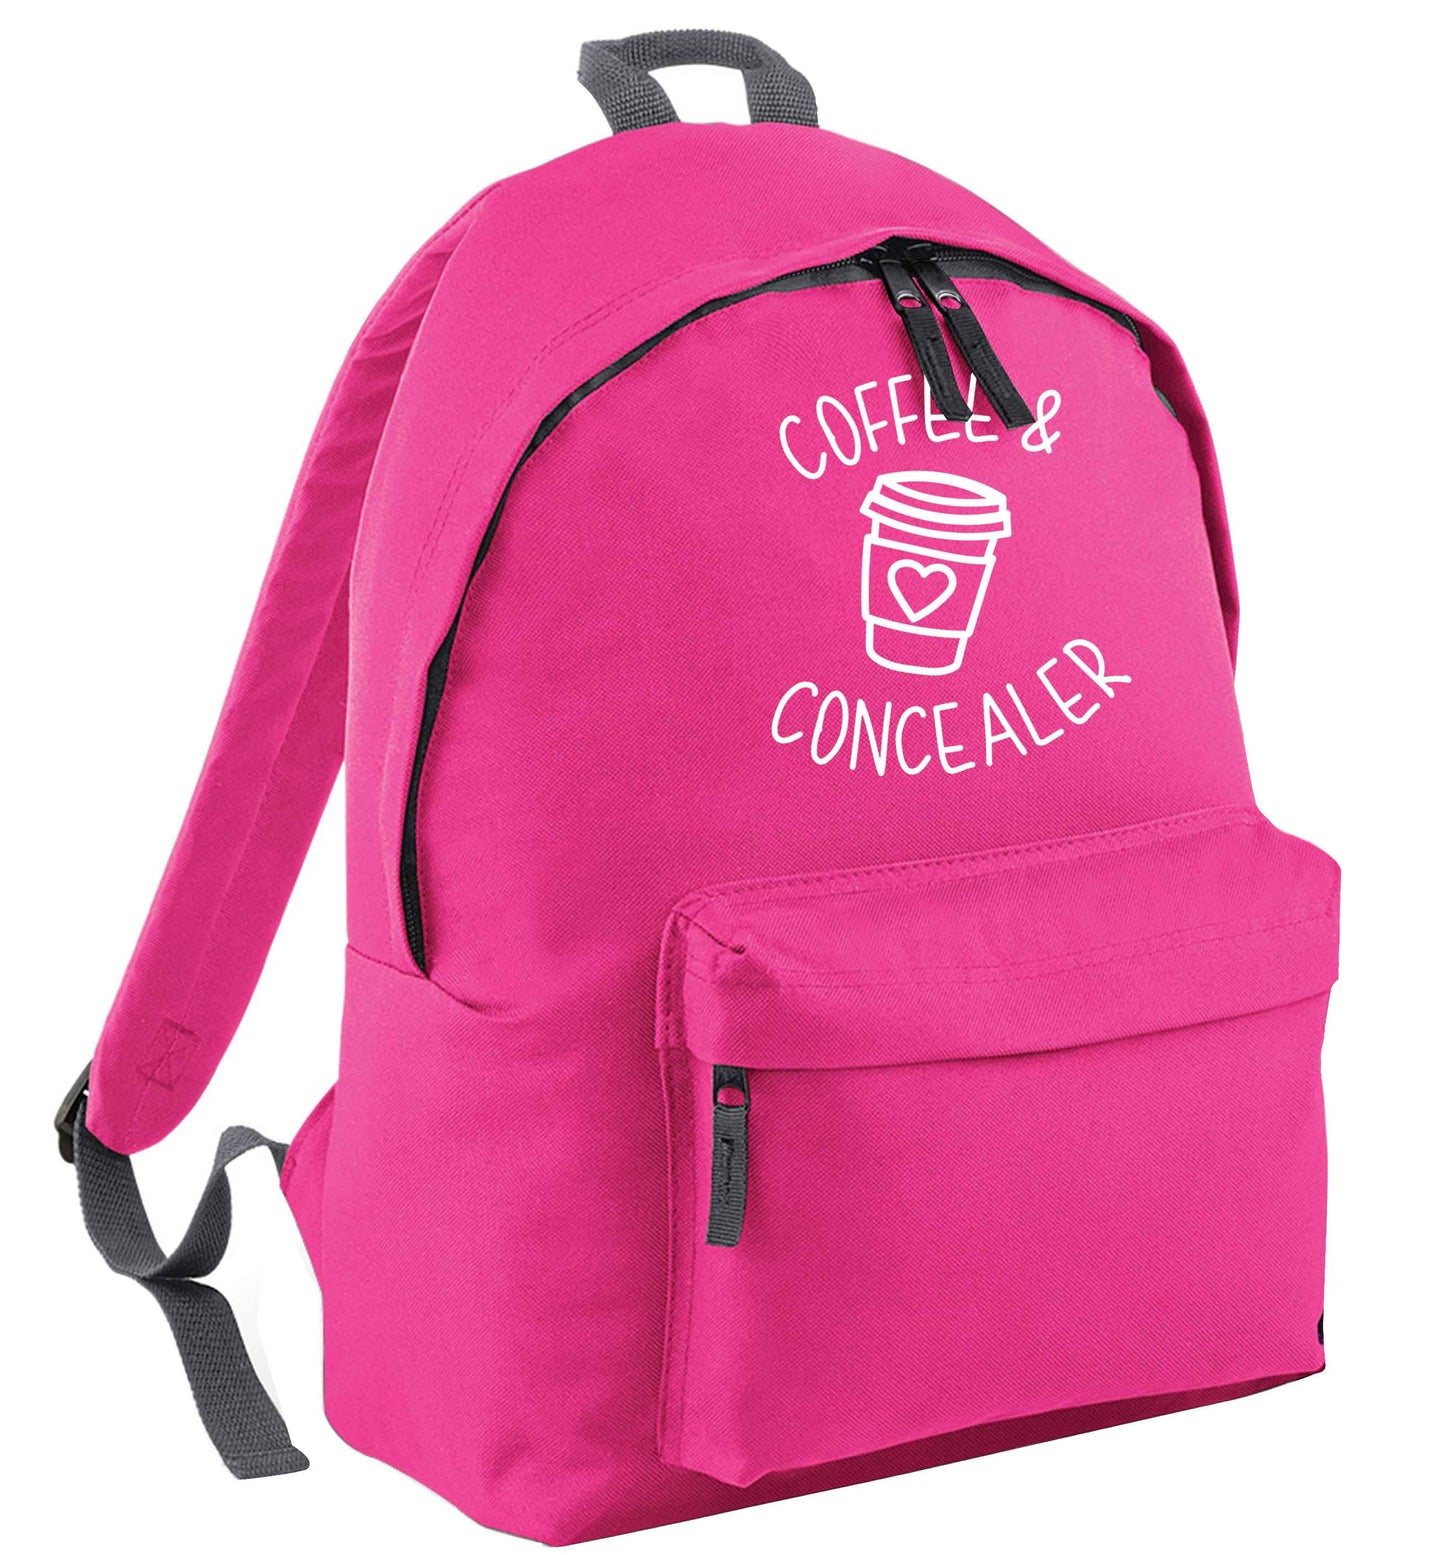 Coffee and concealer pink adults backpack